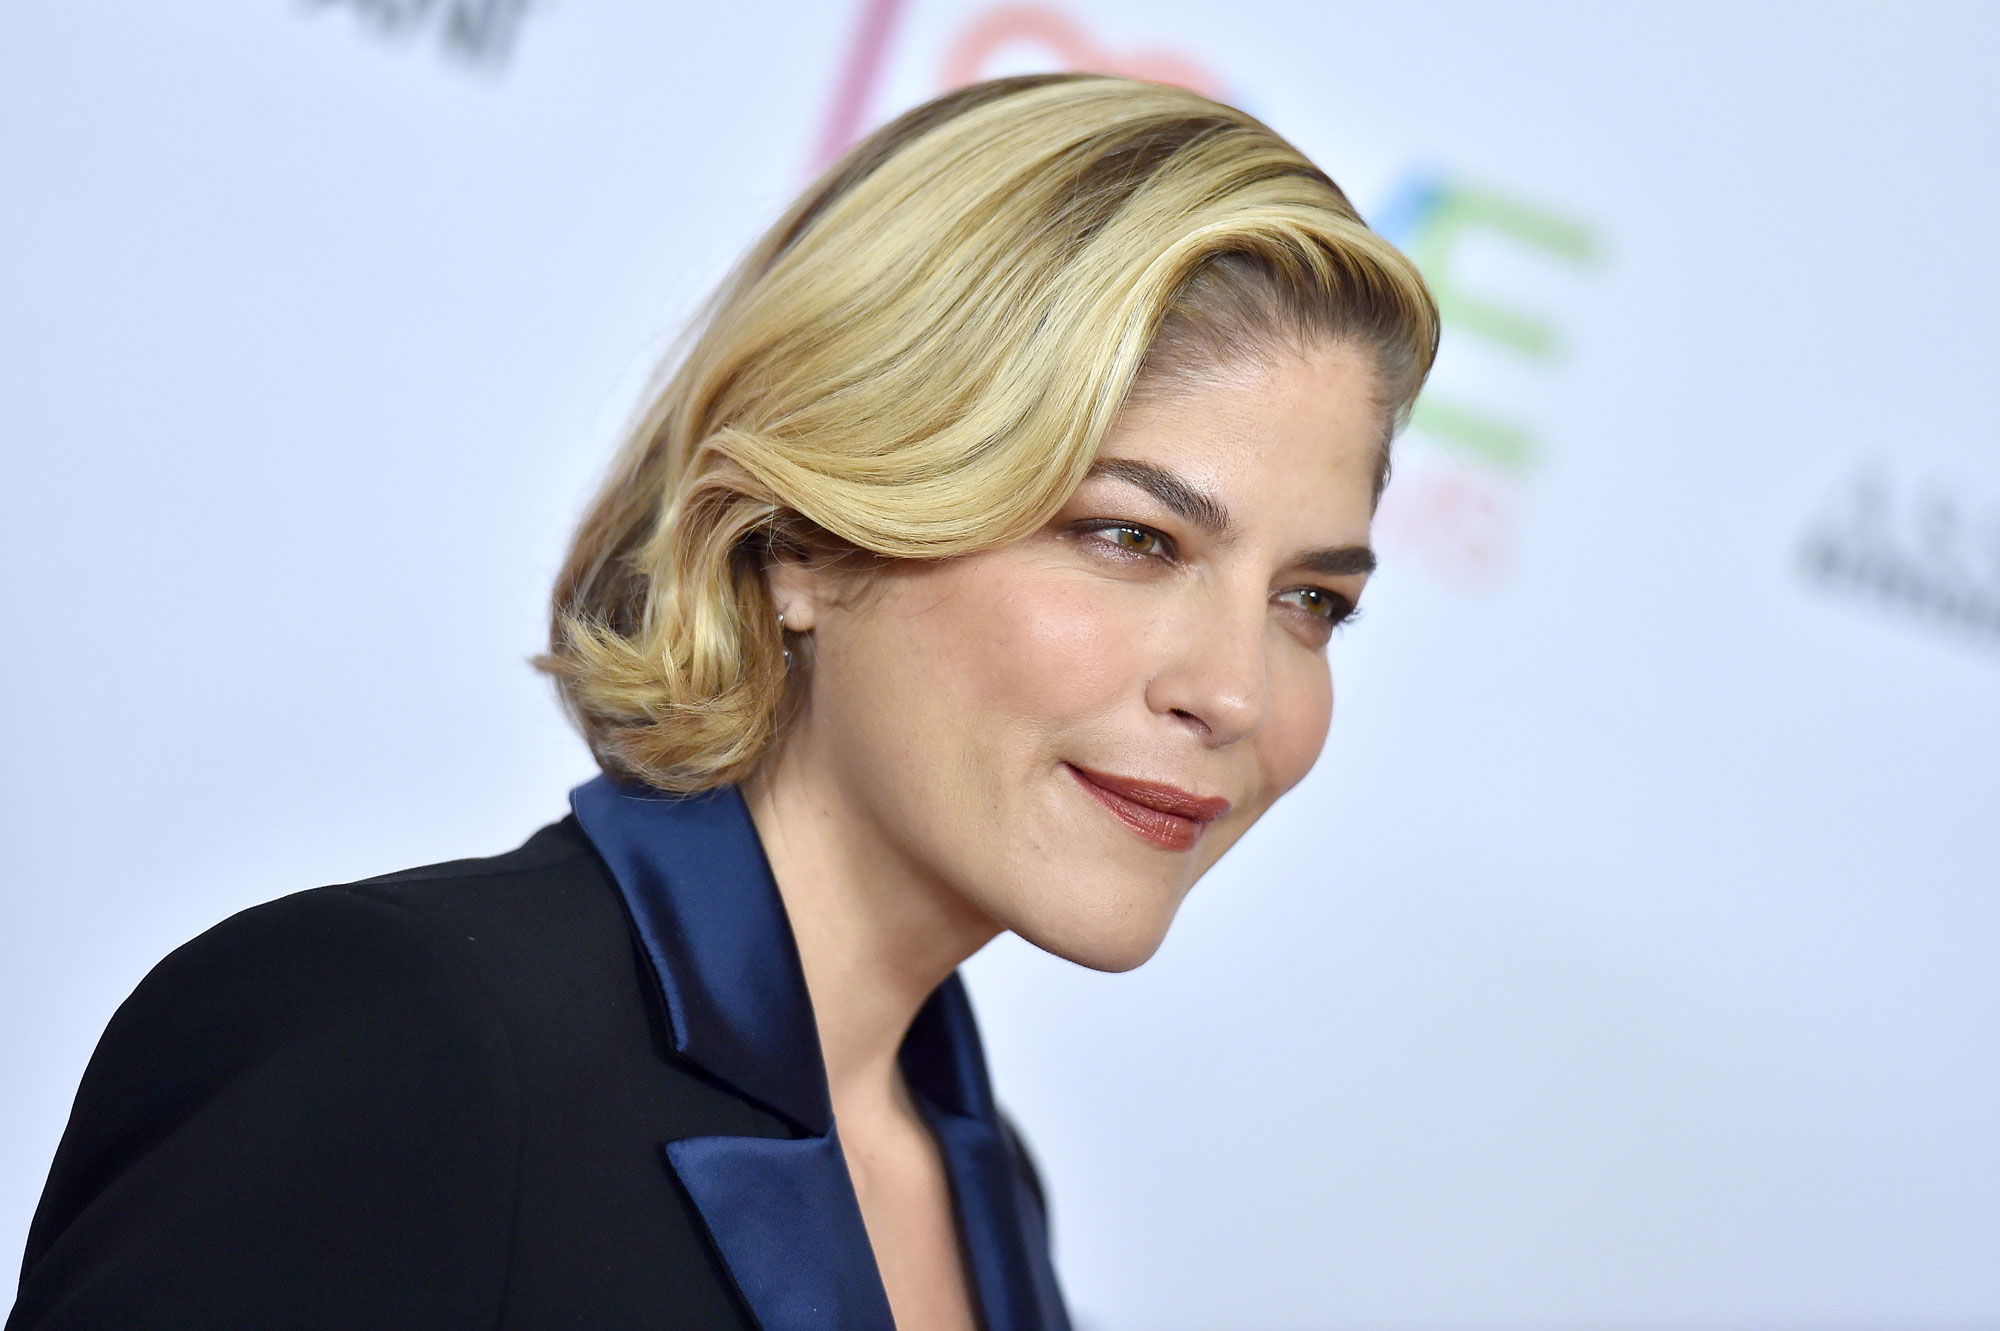 Actress Selma Blair apologizes over viral Islamophobic comment